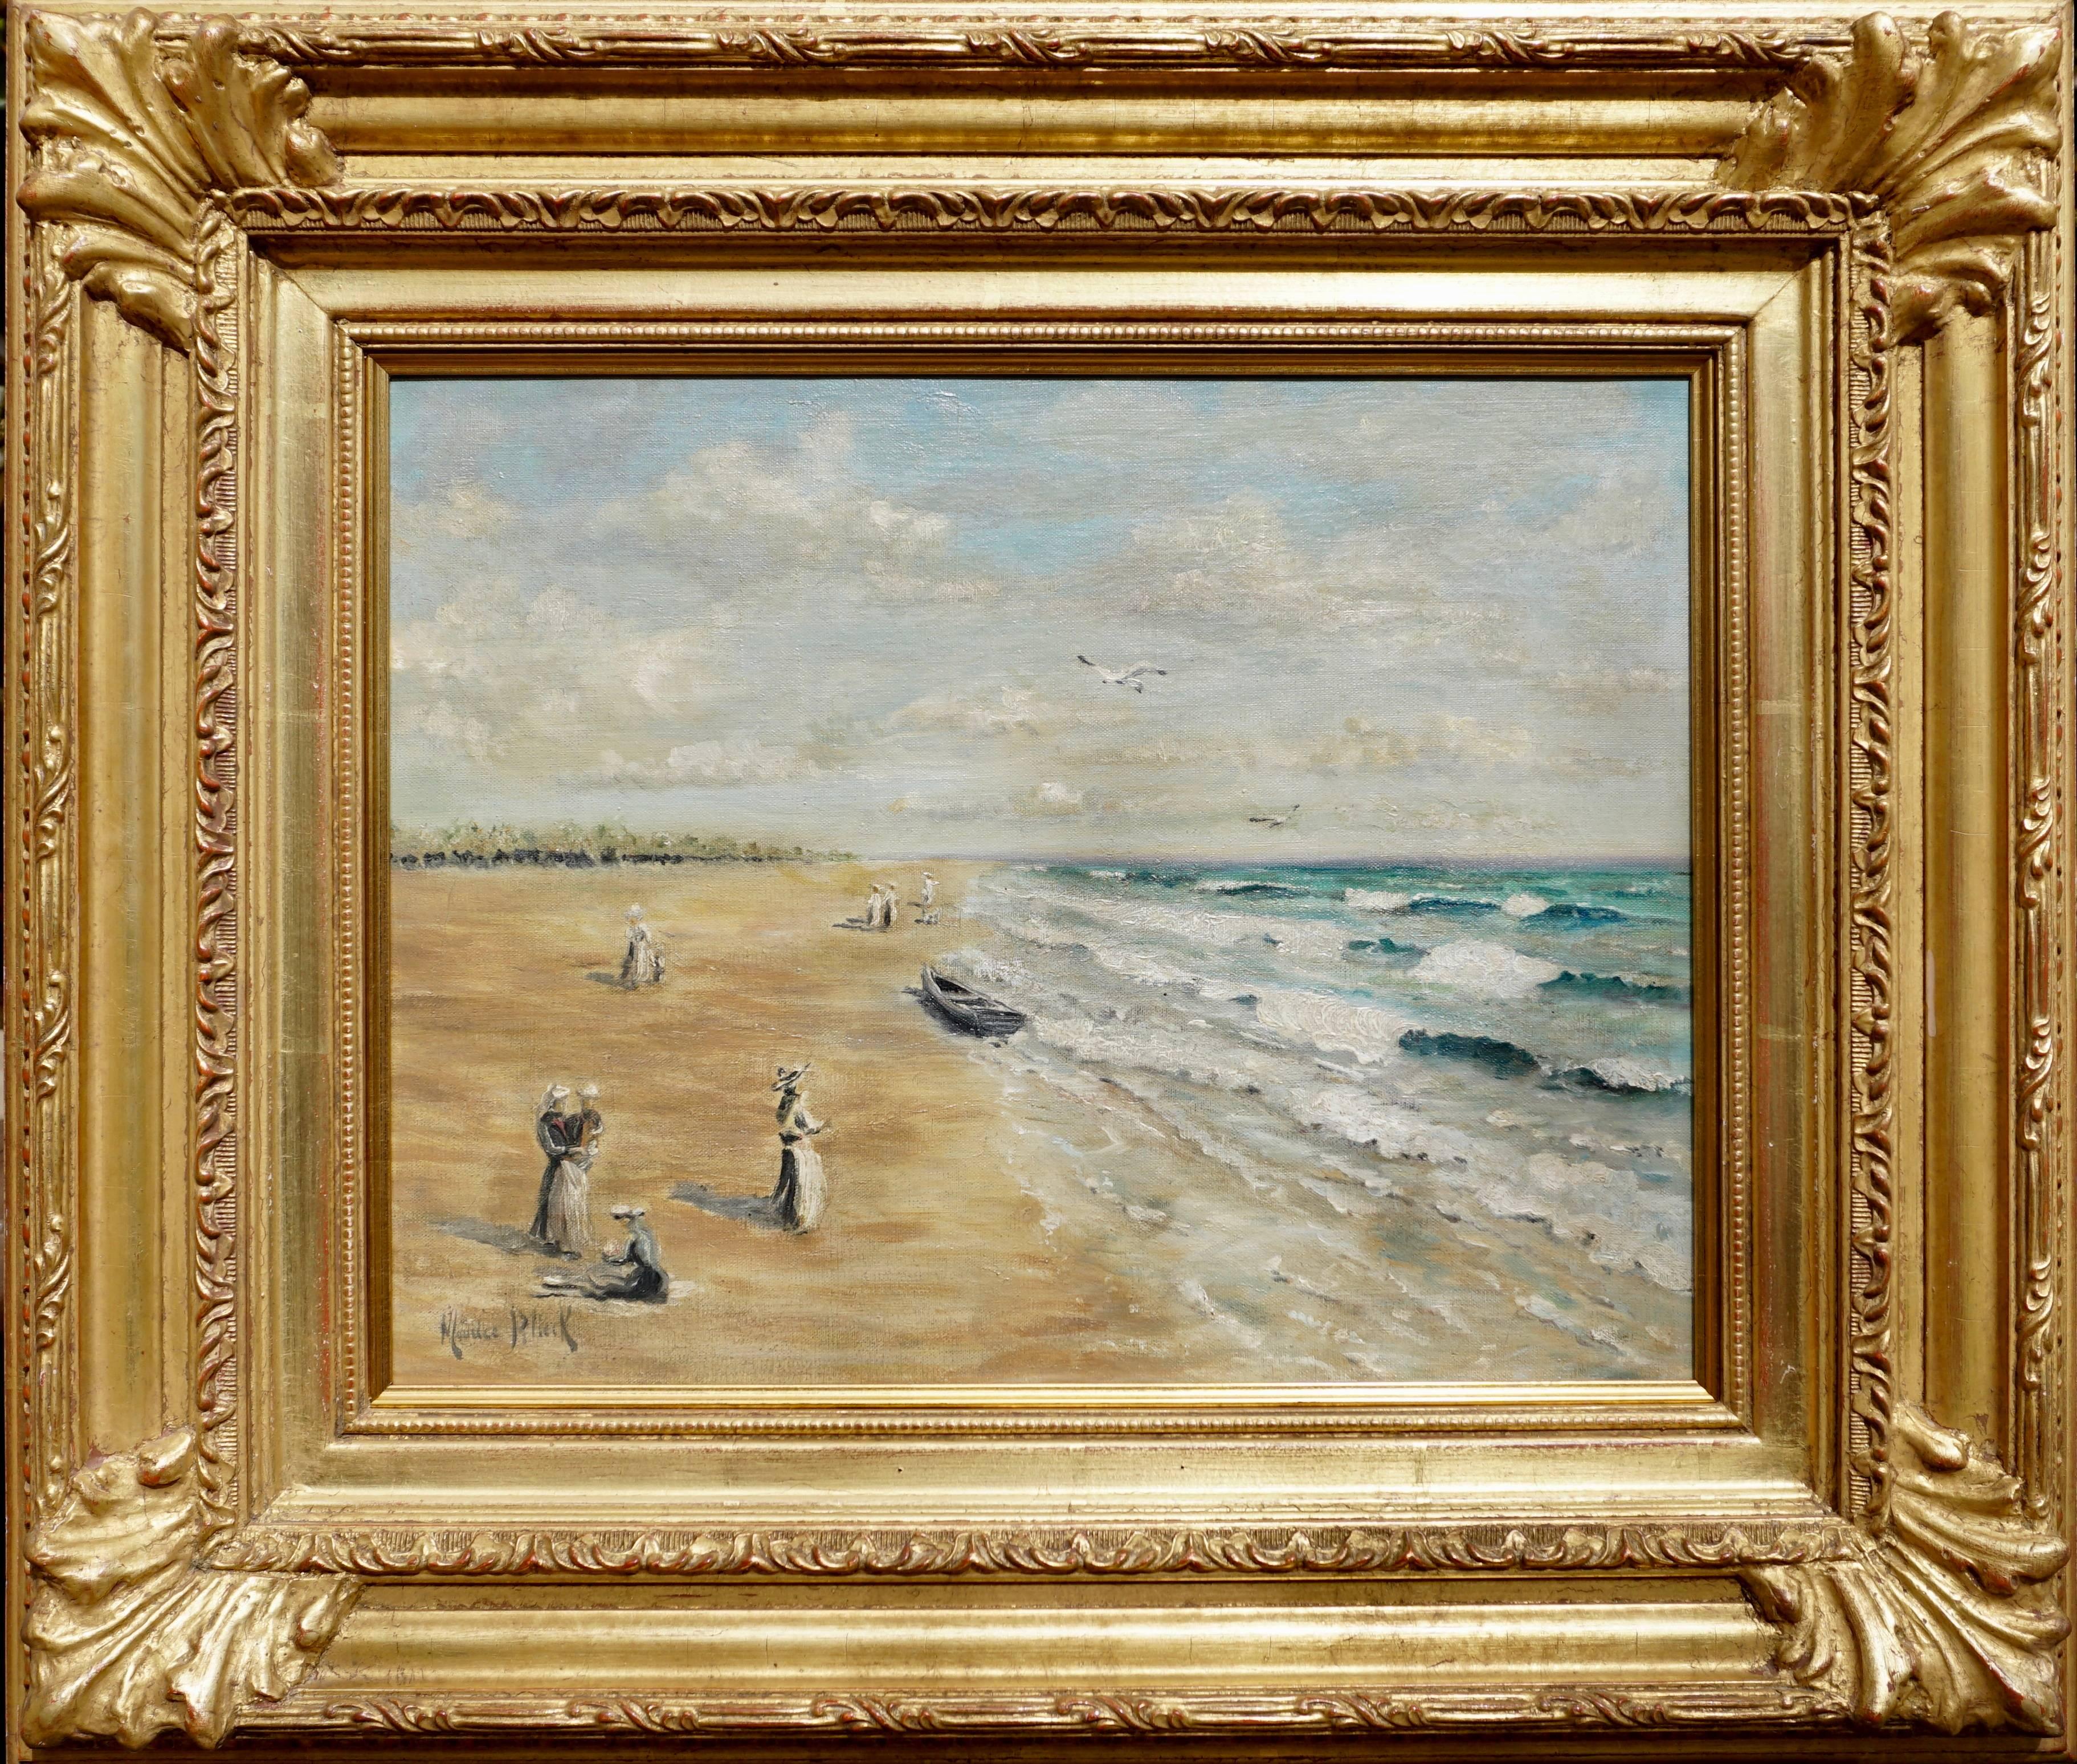 Maurice Blieck (Belgian, 1876-1922) Figures at the Seashore
Oil on canvas relined. Circa 1900 Impressionist art nouveau period.

A serene oil painting of a French or Belgium seaside beach. Soothing colors Create a scene that reminds one of the